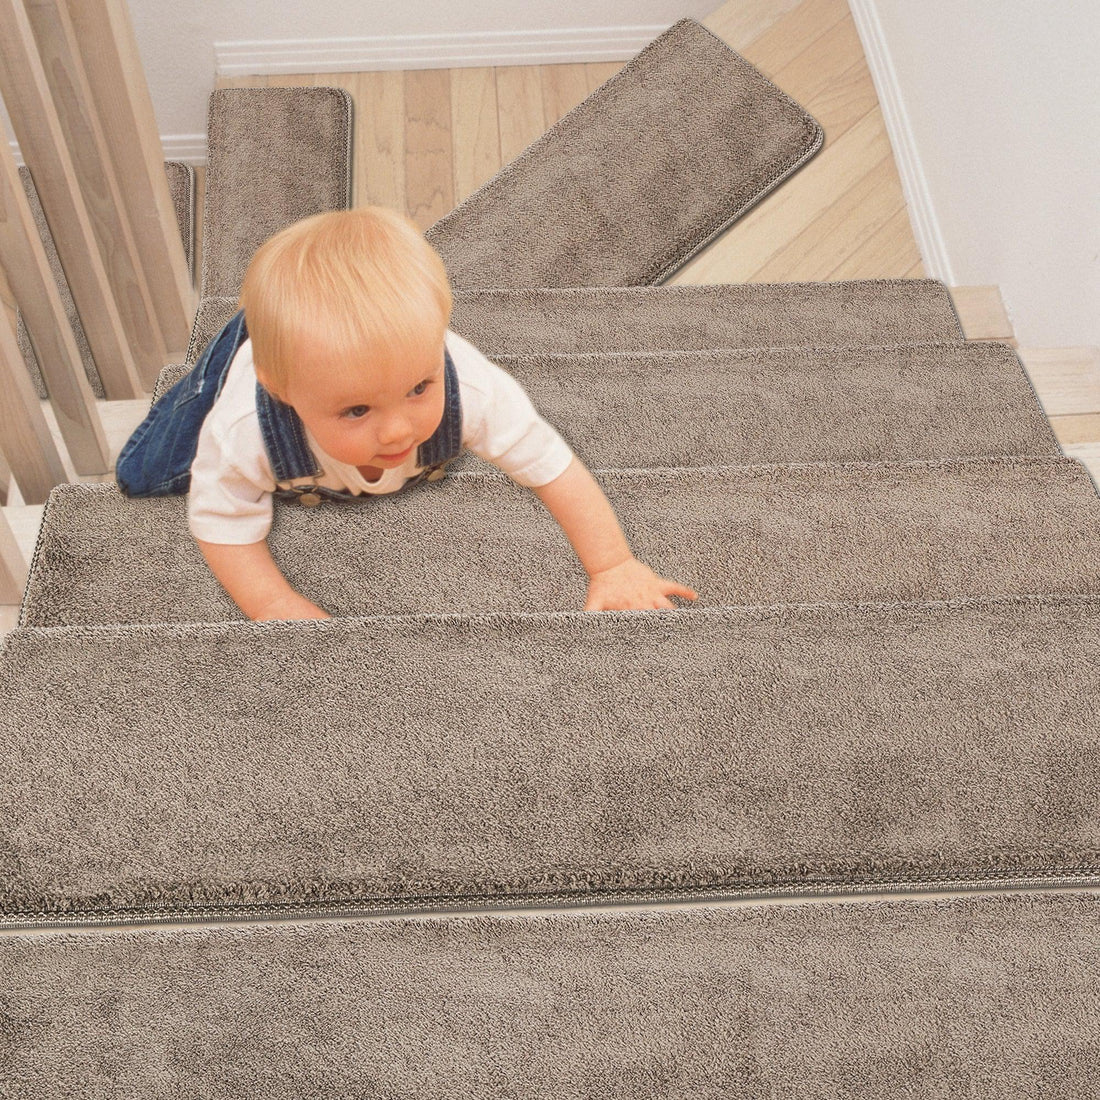 Non-slip stair strips are available in 2 versions, which are they?